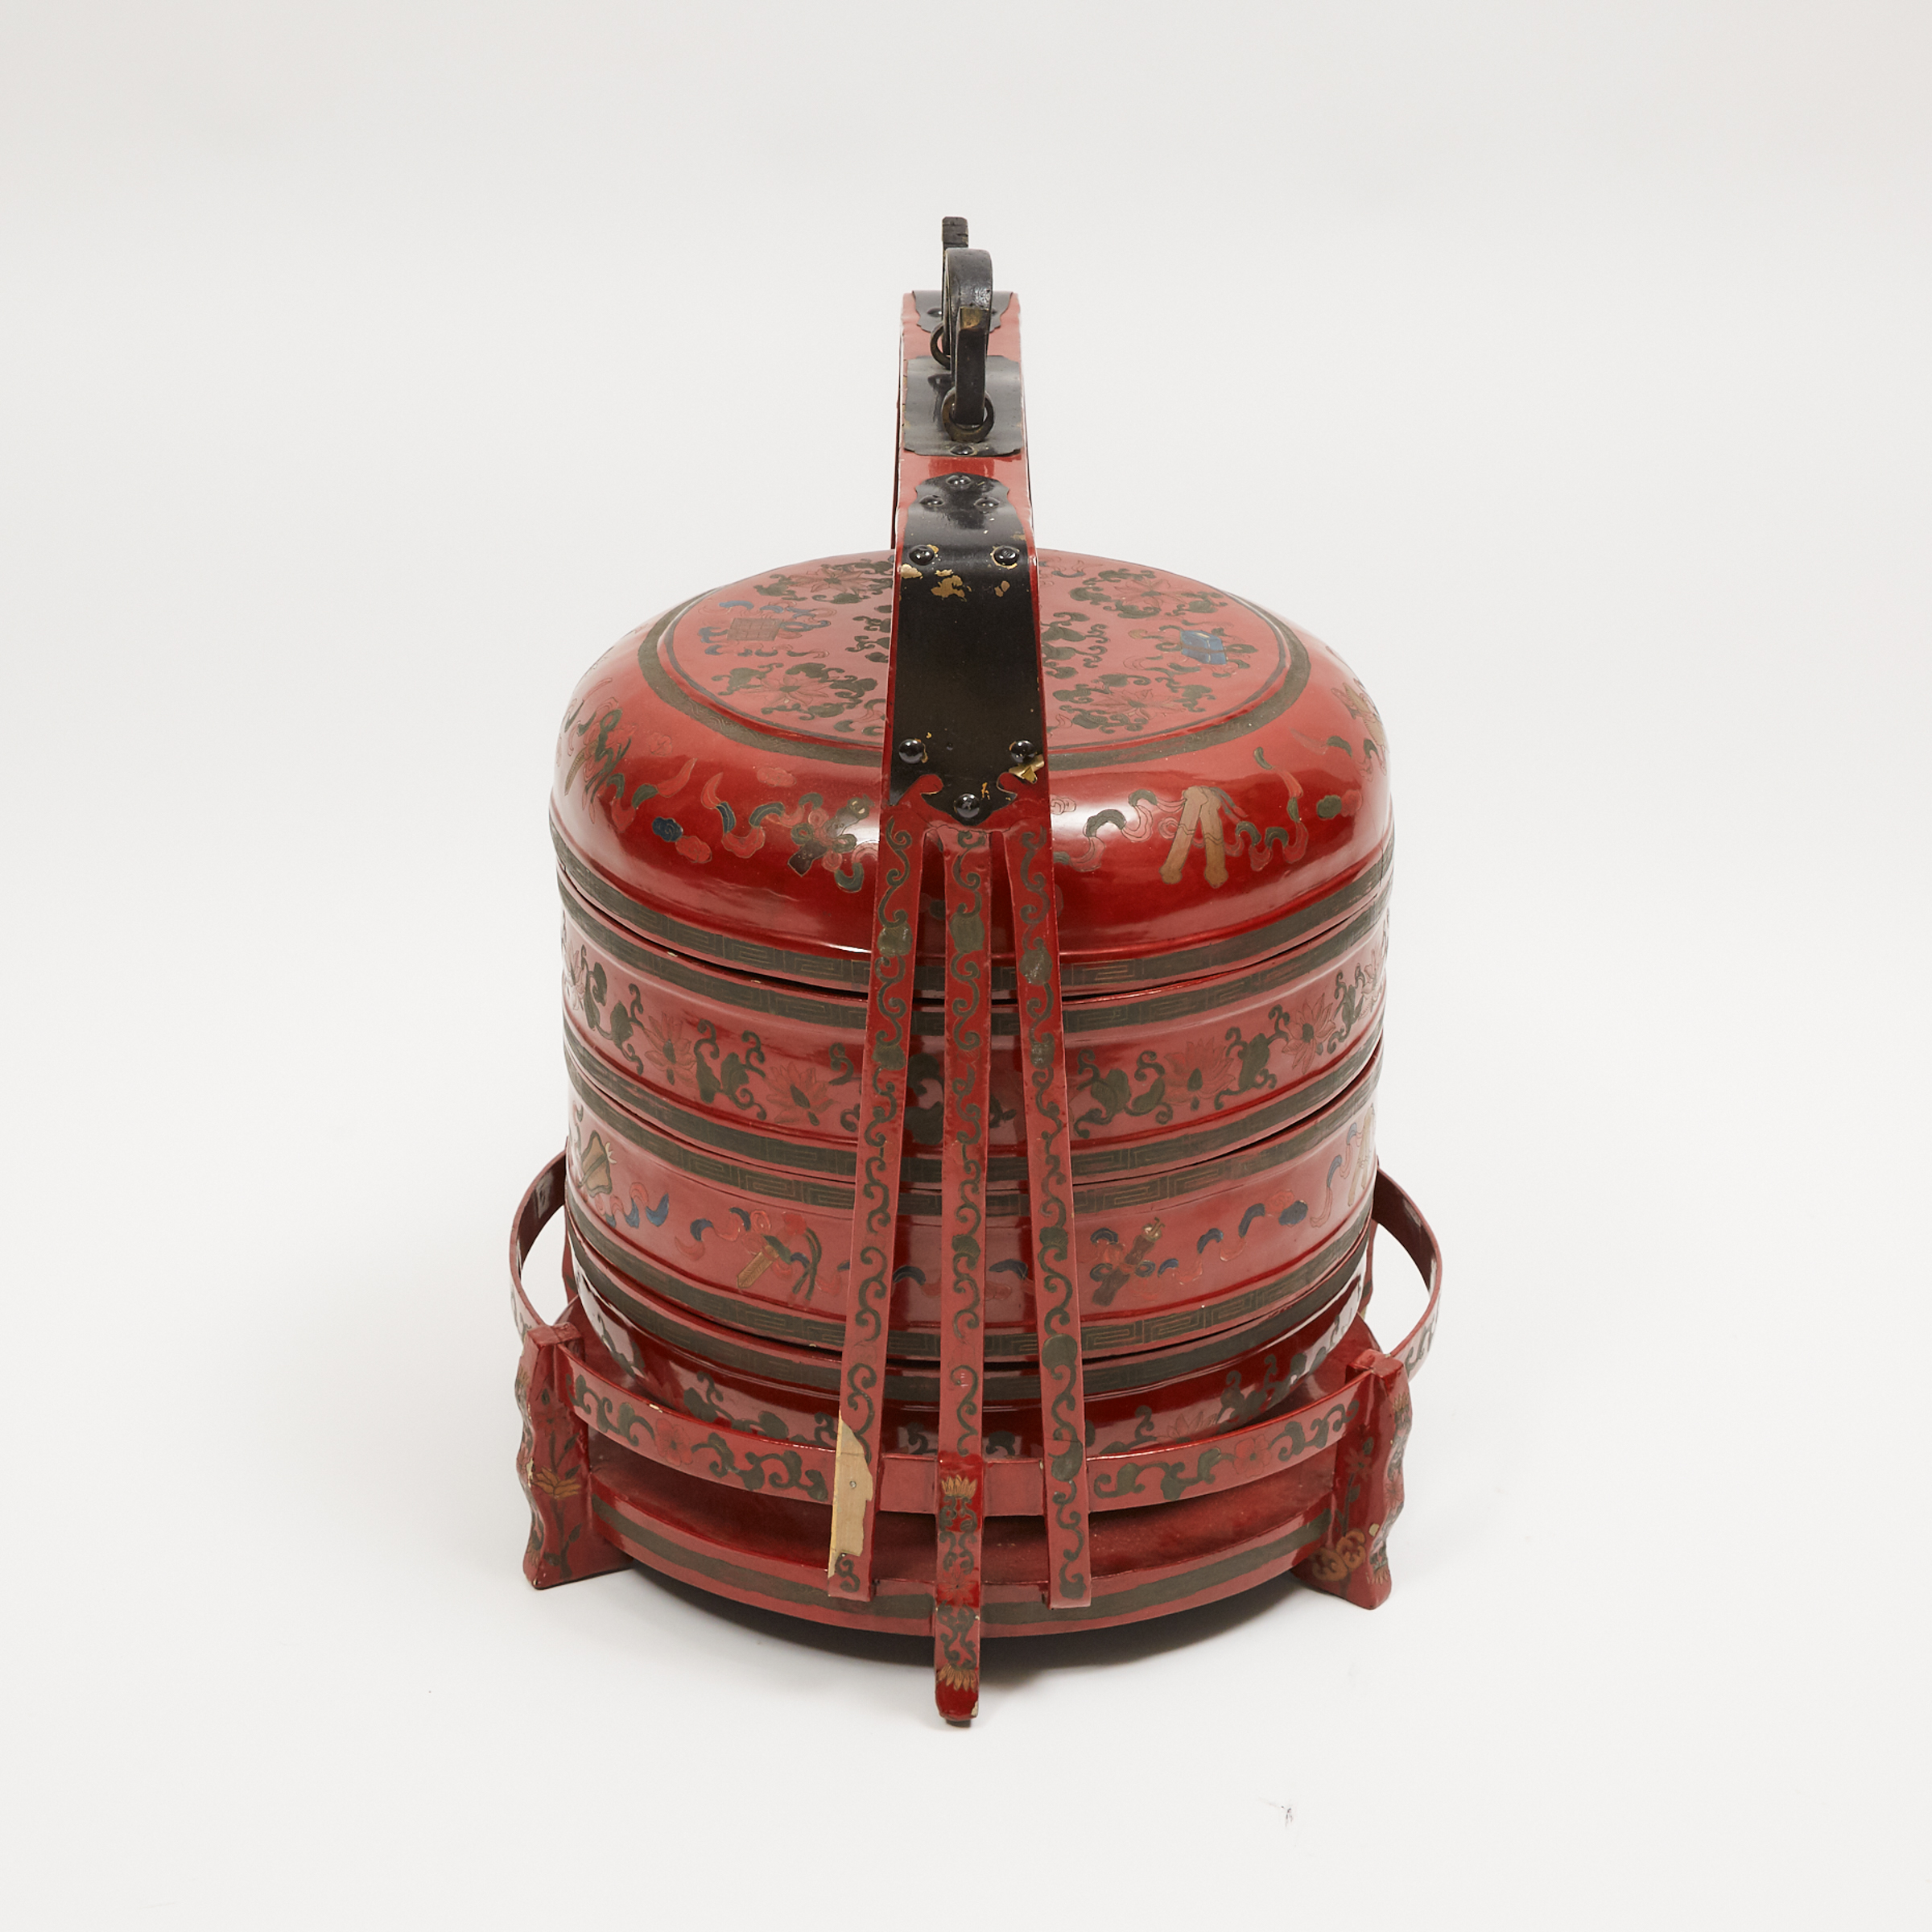 Large Chinese Red Lacquer Wedding Basket on Stand, 20th century